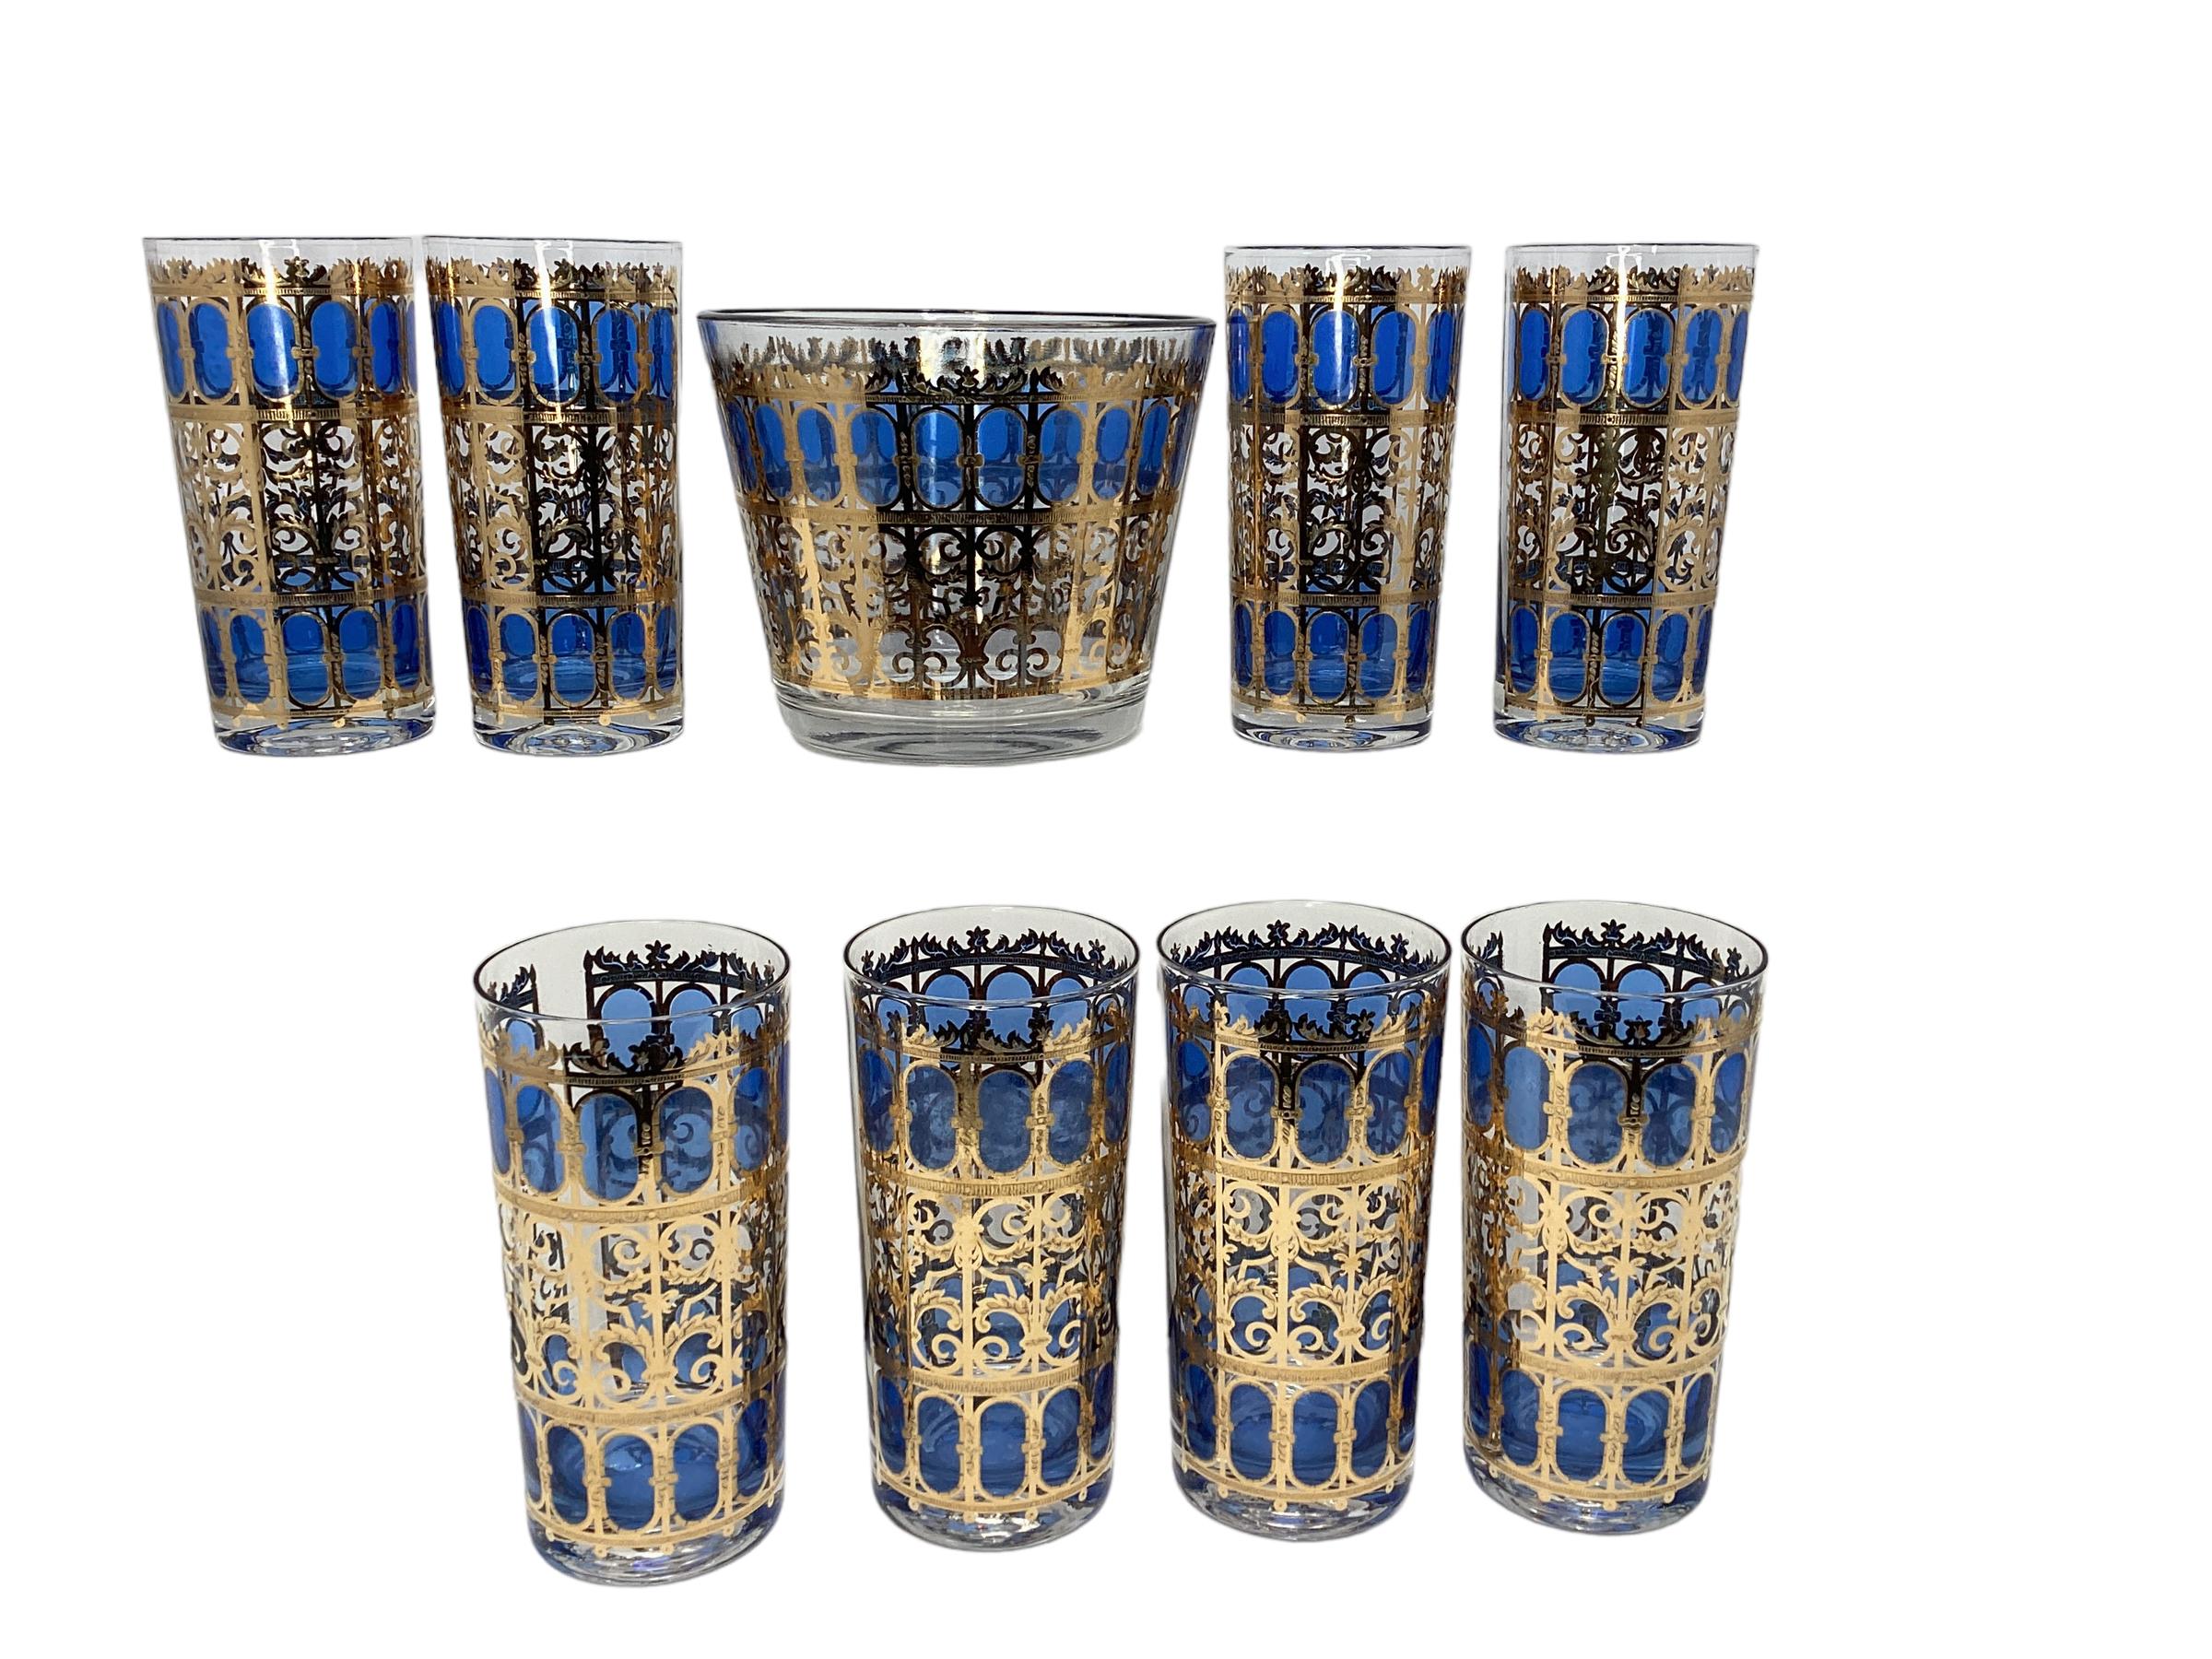 Vintage Culver Cobalt Scroll Cocktail Set, 8 Highball Glasses and Ice Bucket. 22-karat gold filigree scroll work in a Moorish inspired windows pattern with blue ovals filling each window. All in excellent vintage condition.
Glasses 2.75